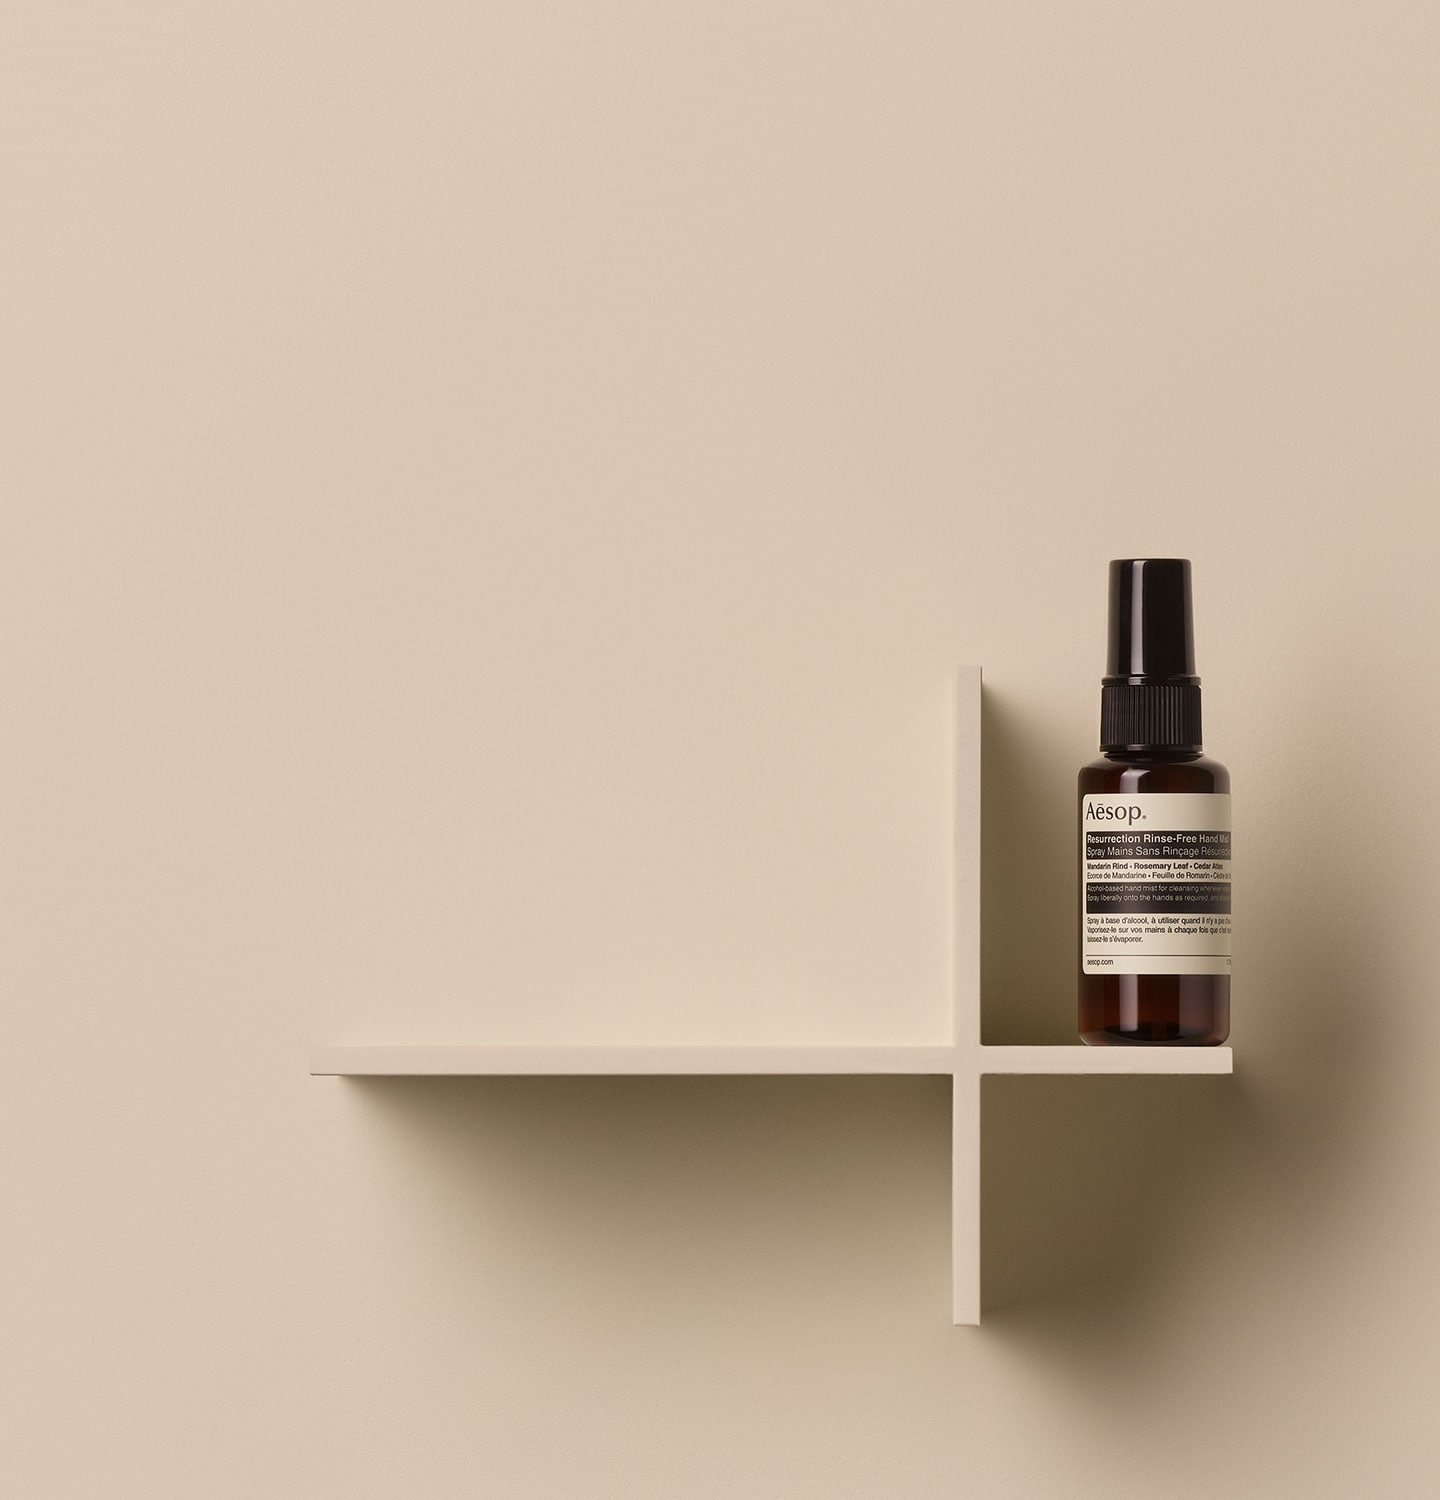 Aesop Resurrection Rinse-Free Hand Mist in small amber spray bottle arranged on a wooden object in a beige background